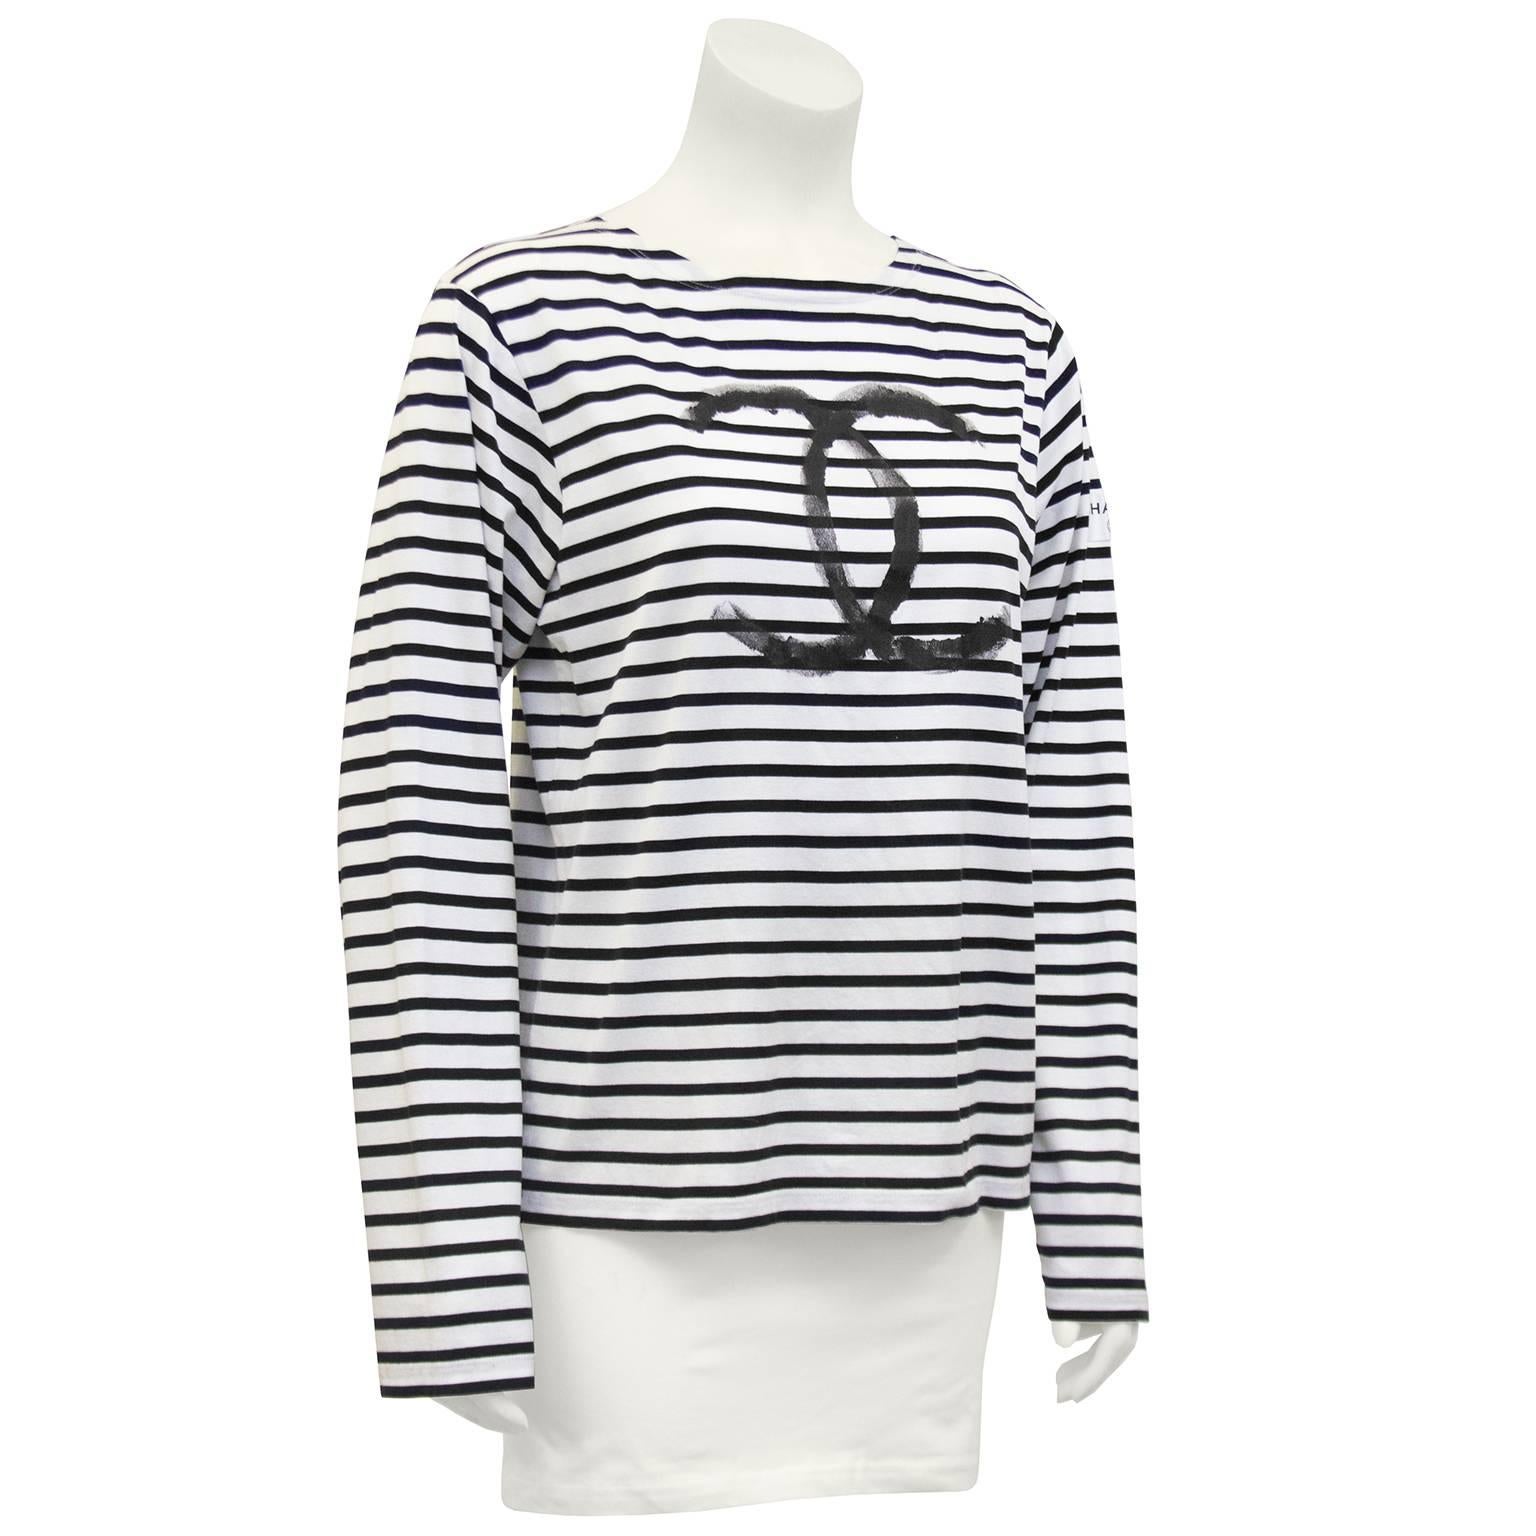 Limited edition white with black horizontal stripes cotton long sleeve shirt from the Chanel 2008 Christmas collection. Large black hand painted CC logo on front. Chanel tag patch on left sleeve. Made in Italy. Size S, but fits more like a M/L. Seen